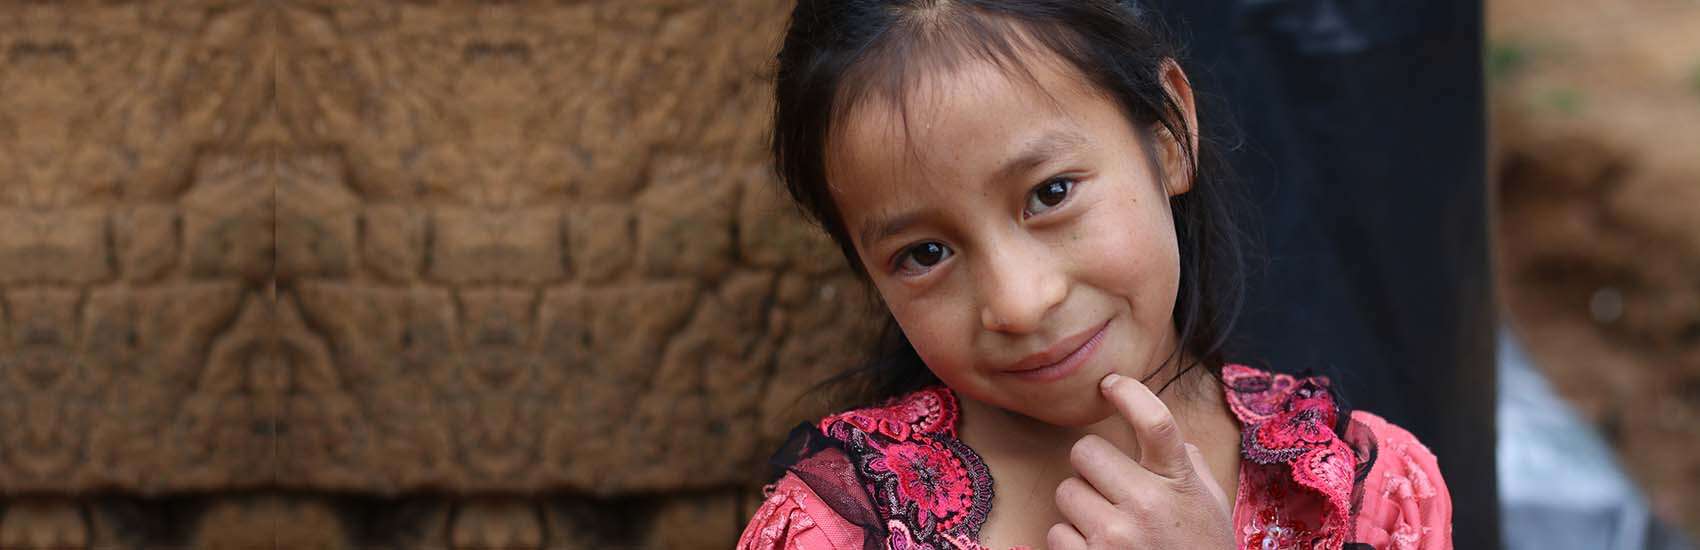 In Guatemala, a girl smiles while holding a finger up to her face.